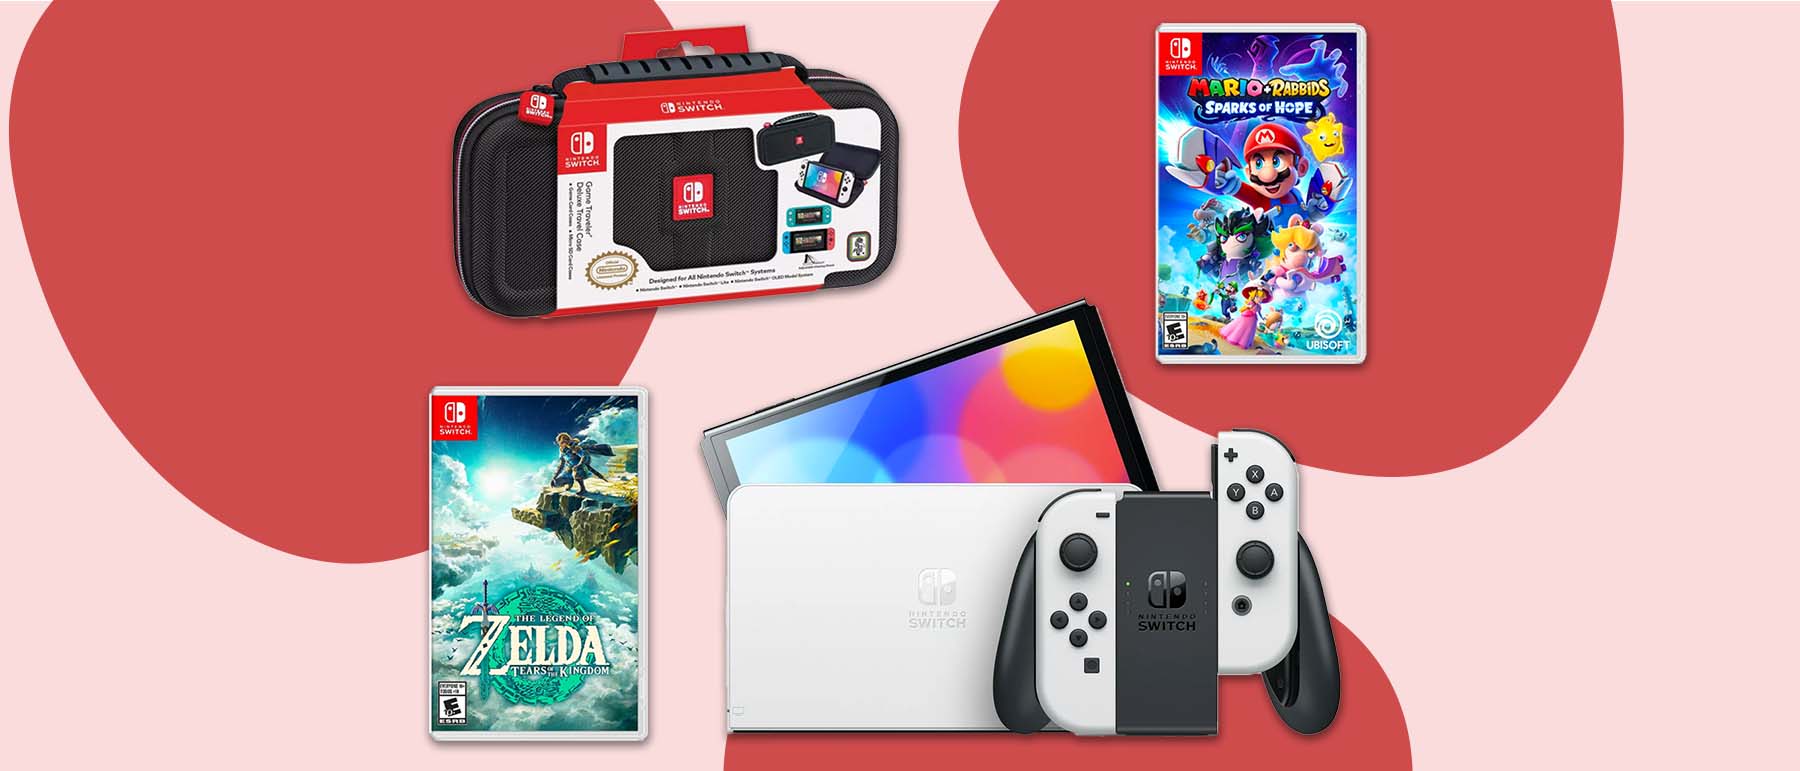 nintendo switch oled, travel case, zelda: tears of the kingdom and mario + rabbids games on red background